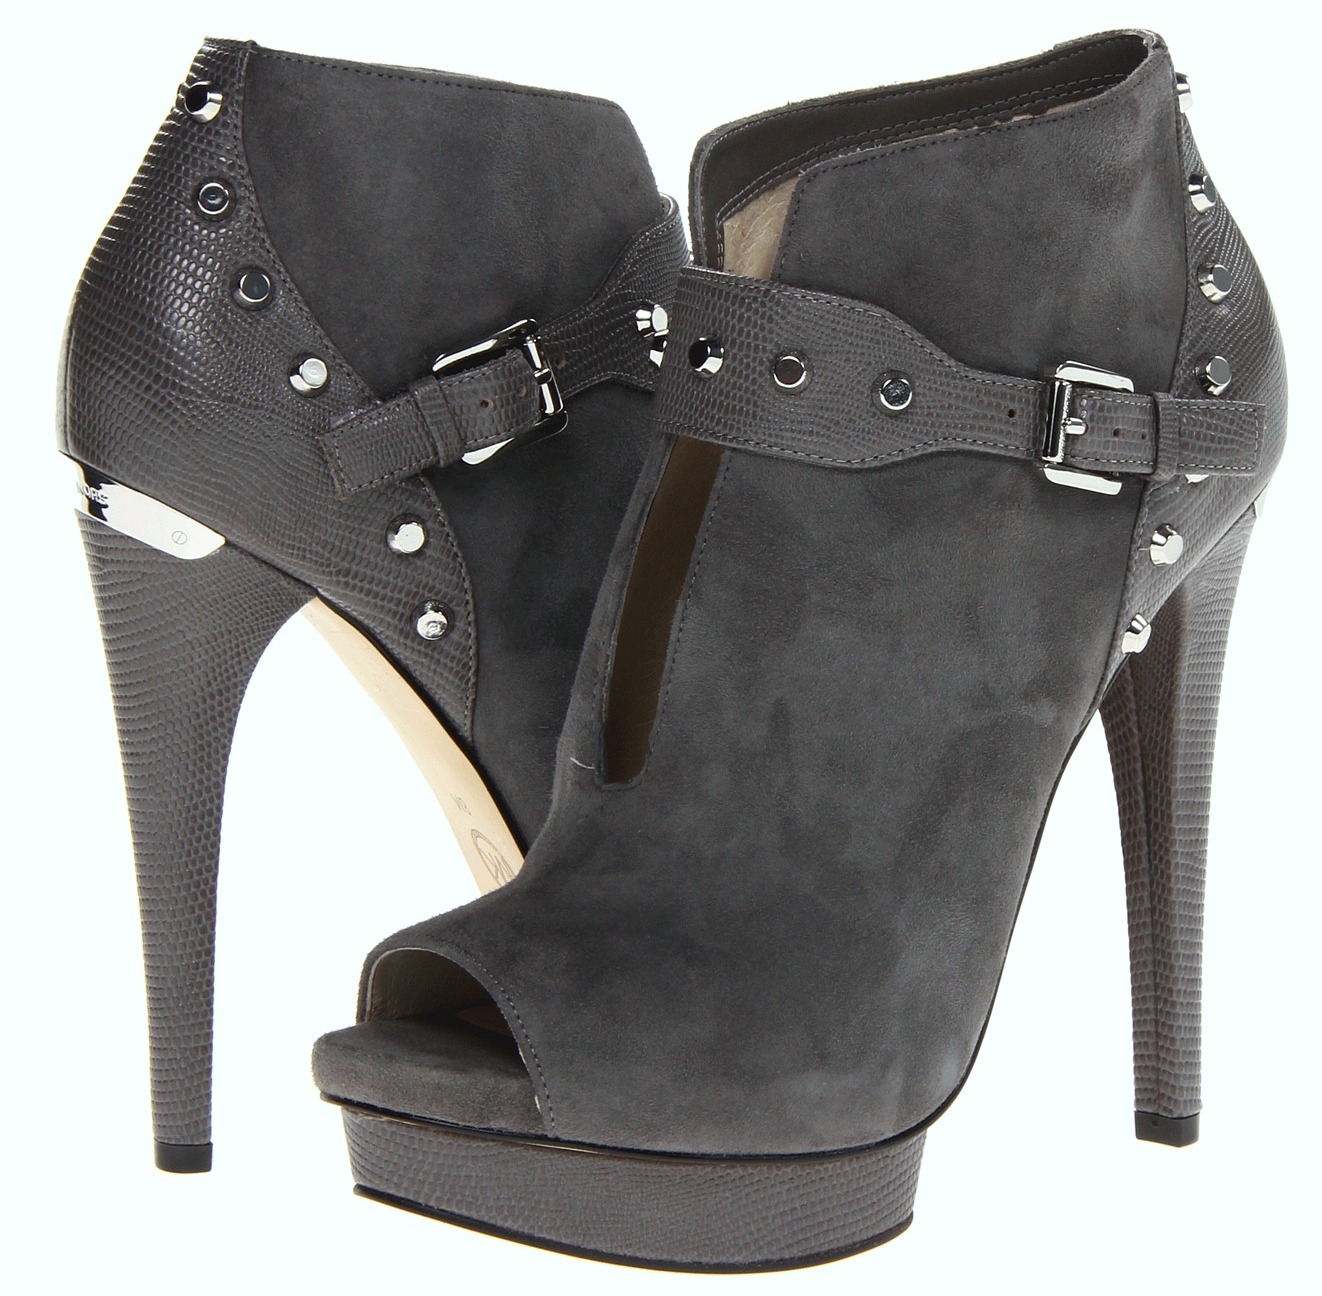 Shoe of the Day | MICHAEL Michael Kors Ailee Open Toe Boots | SHOEOGRAPHY